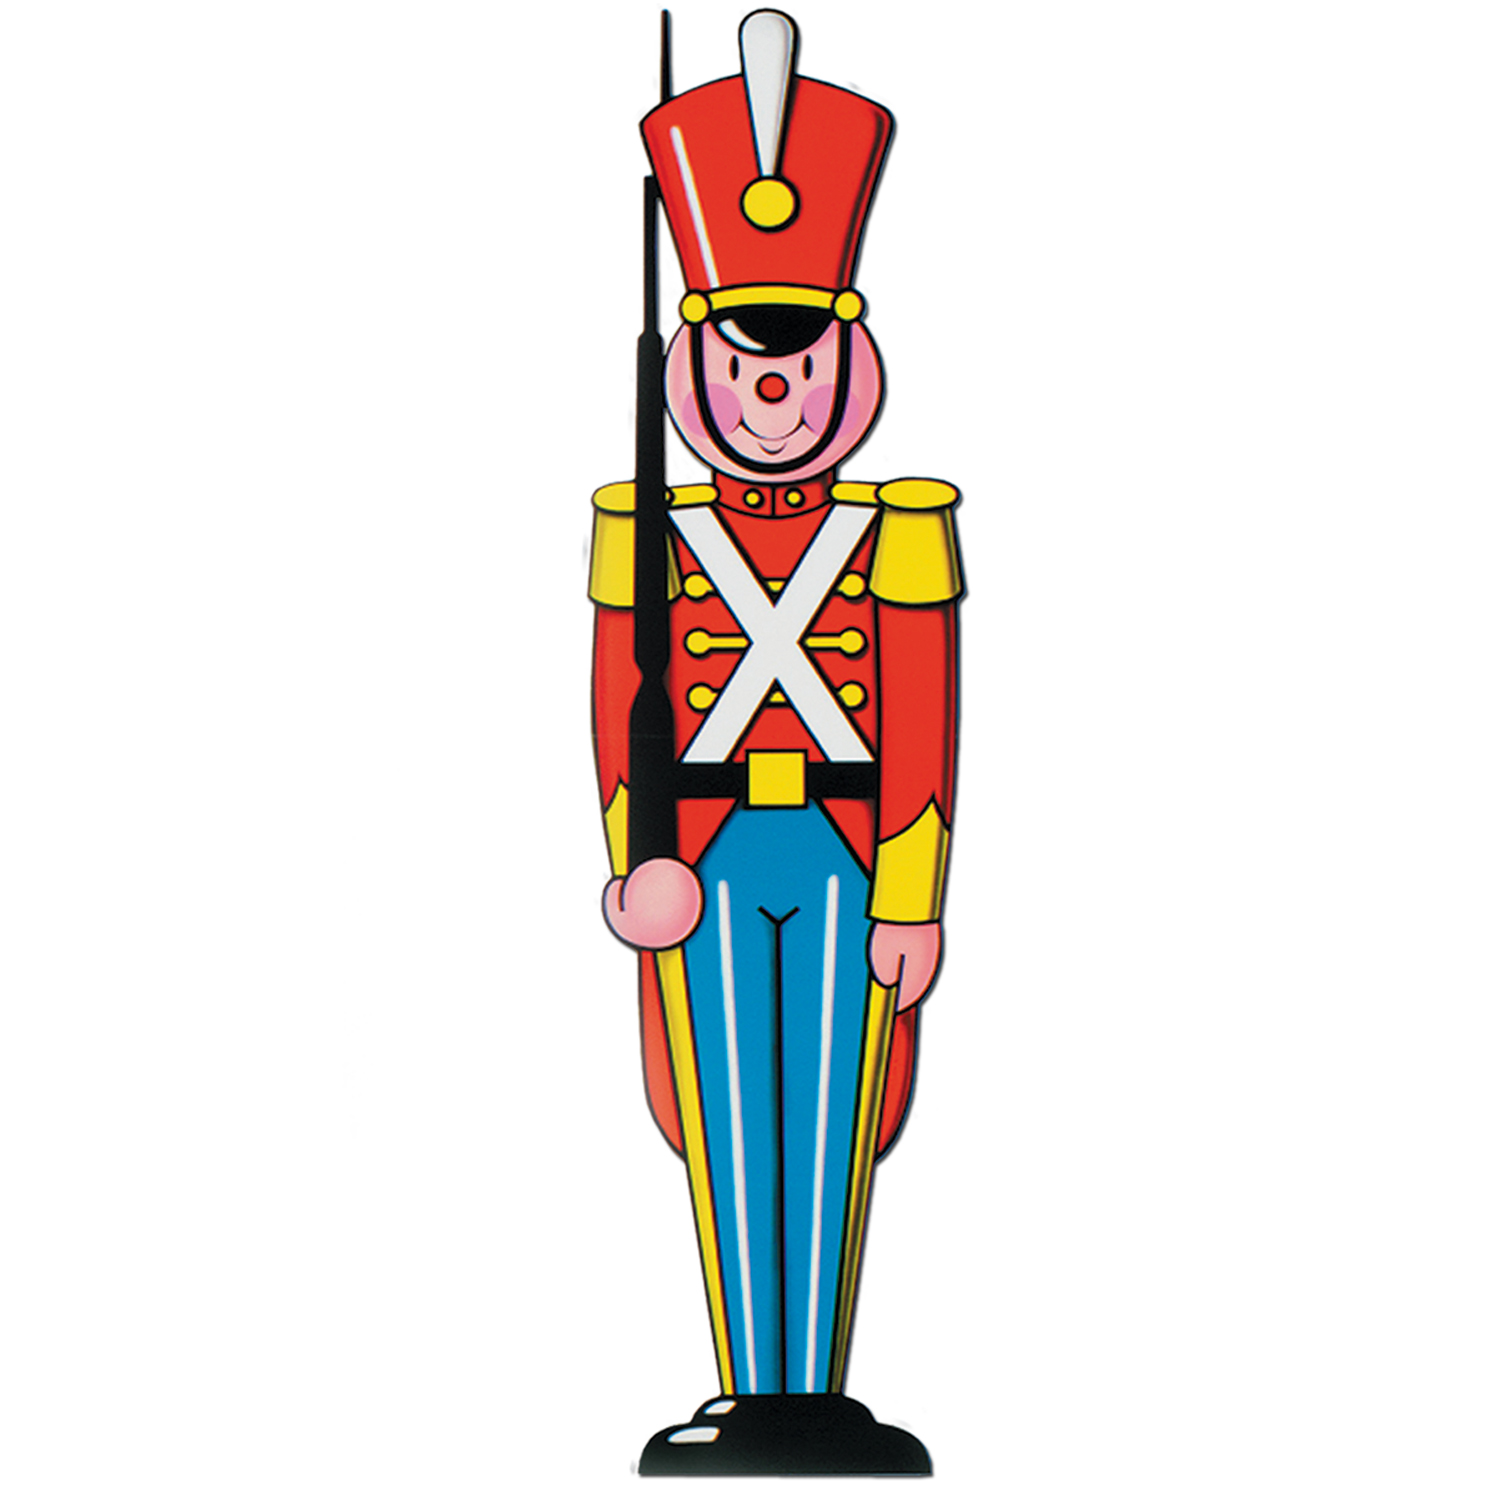 24 Pieces Toy Soldier Cutout - Hanging Decorations & Cut Out